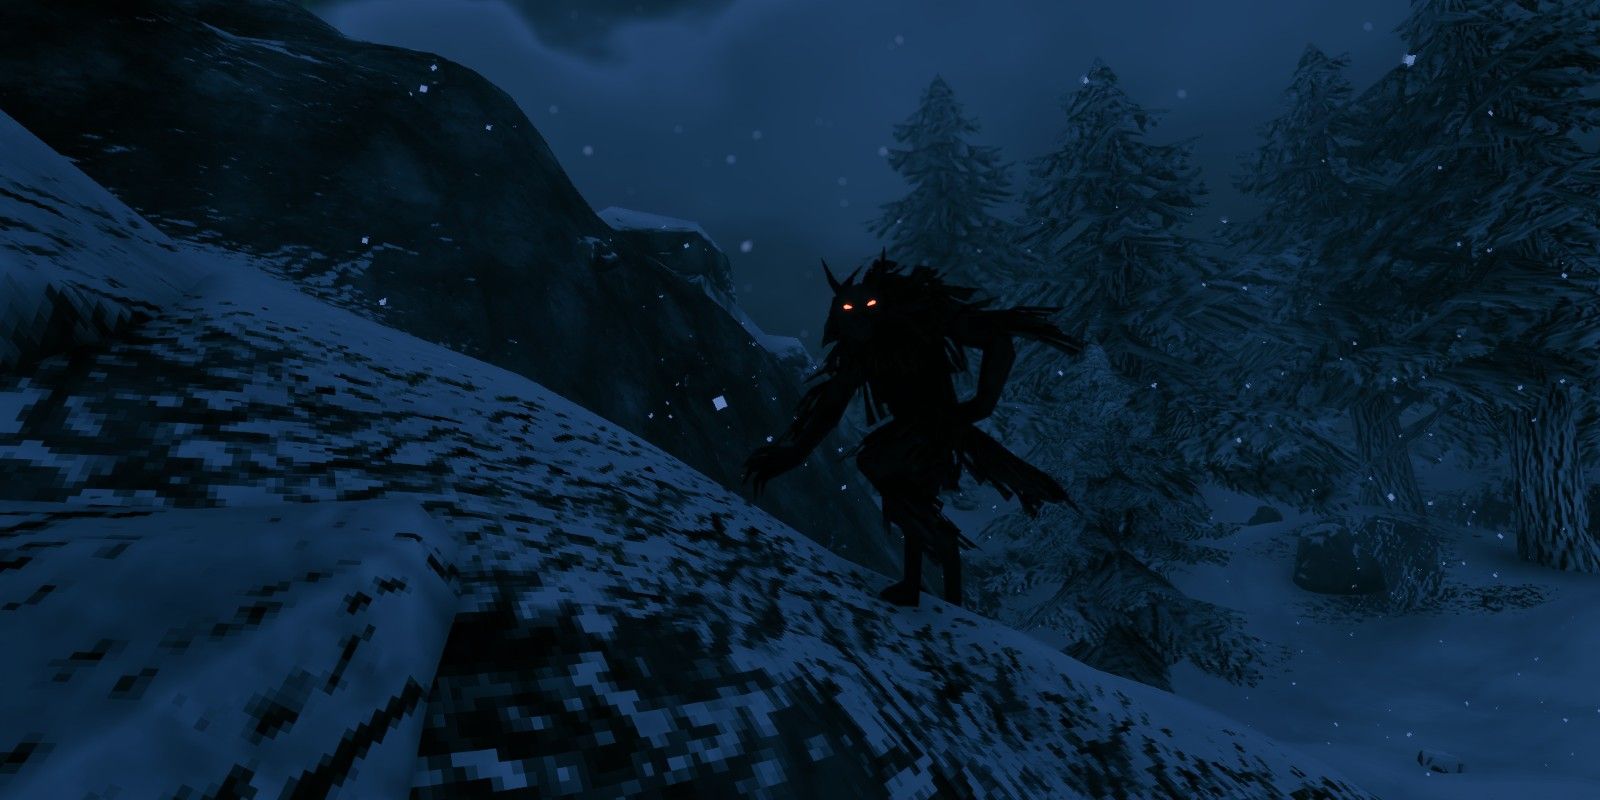 A player faces a Fenring in the Mountains at night in Valheim